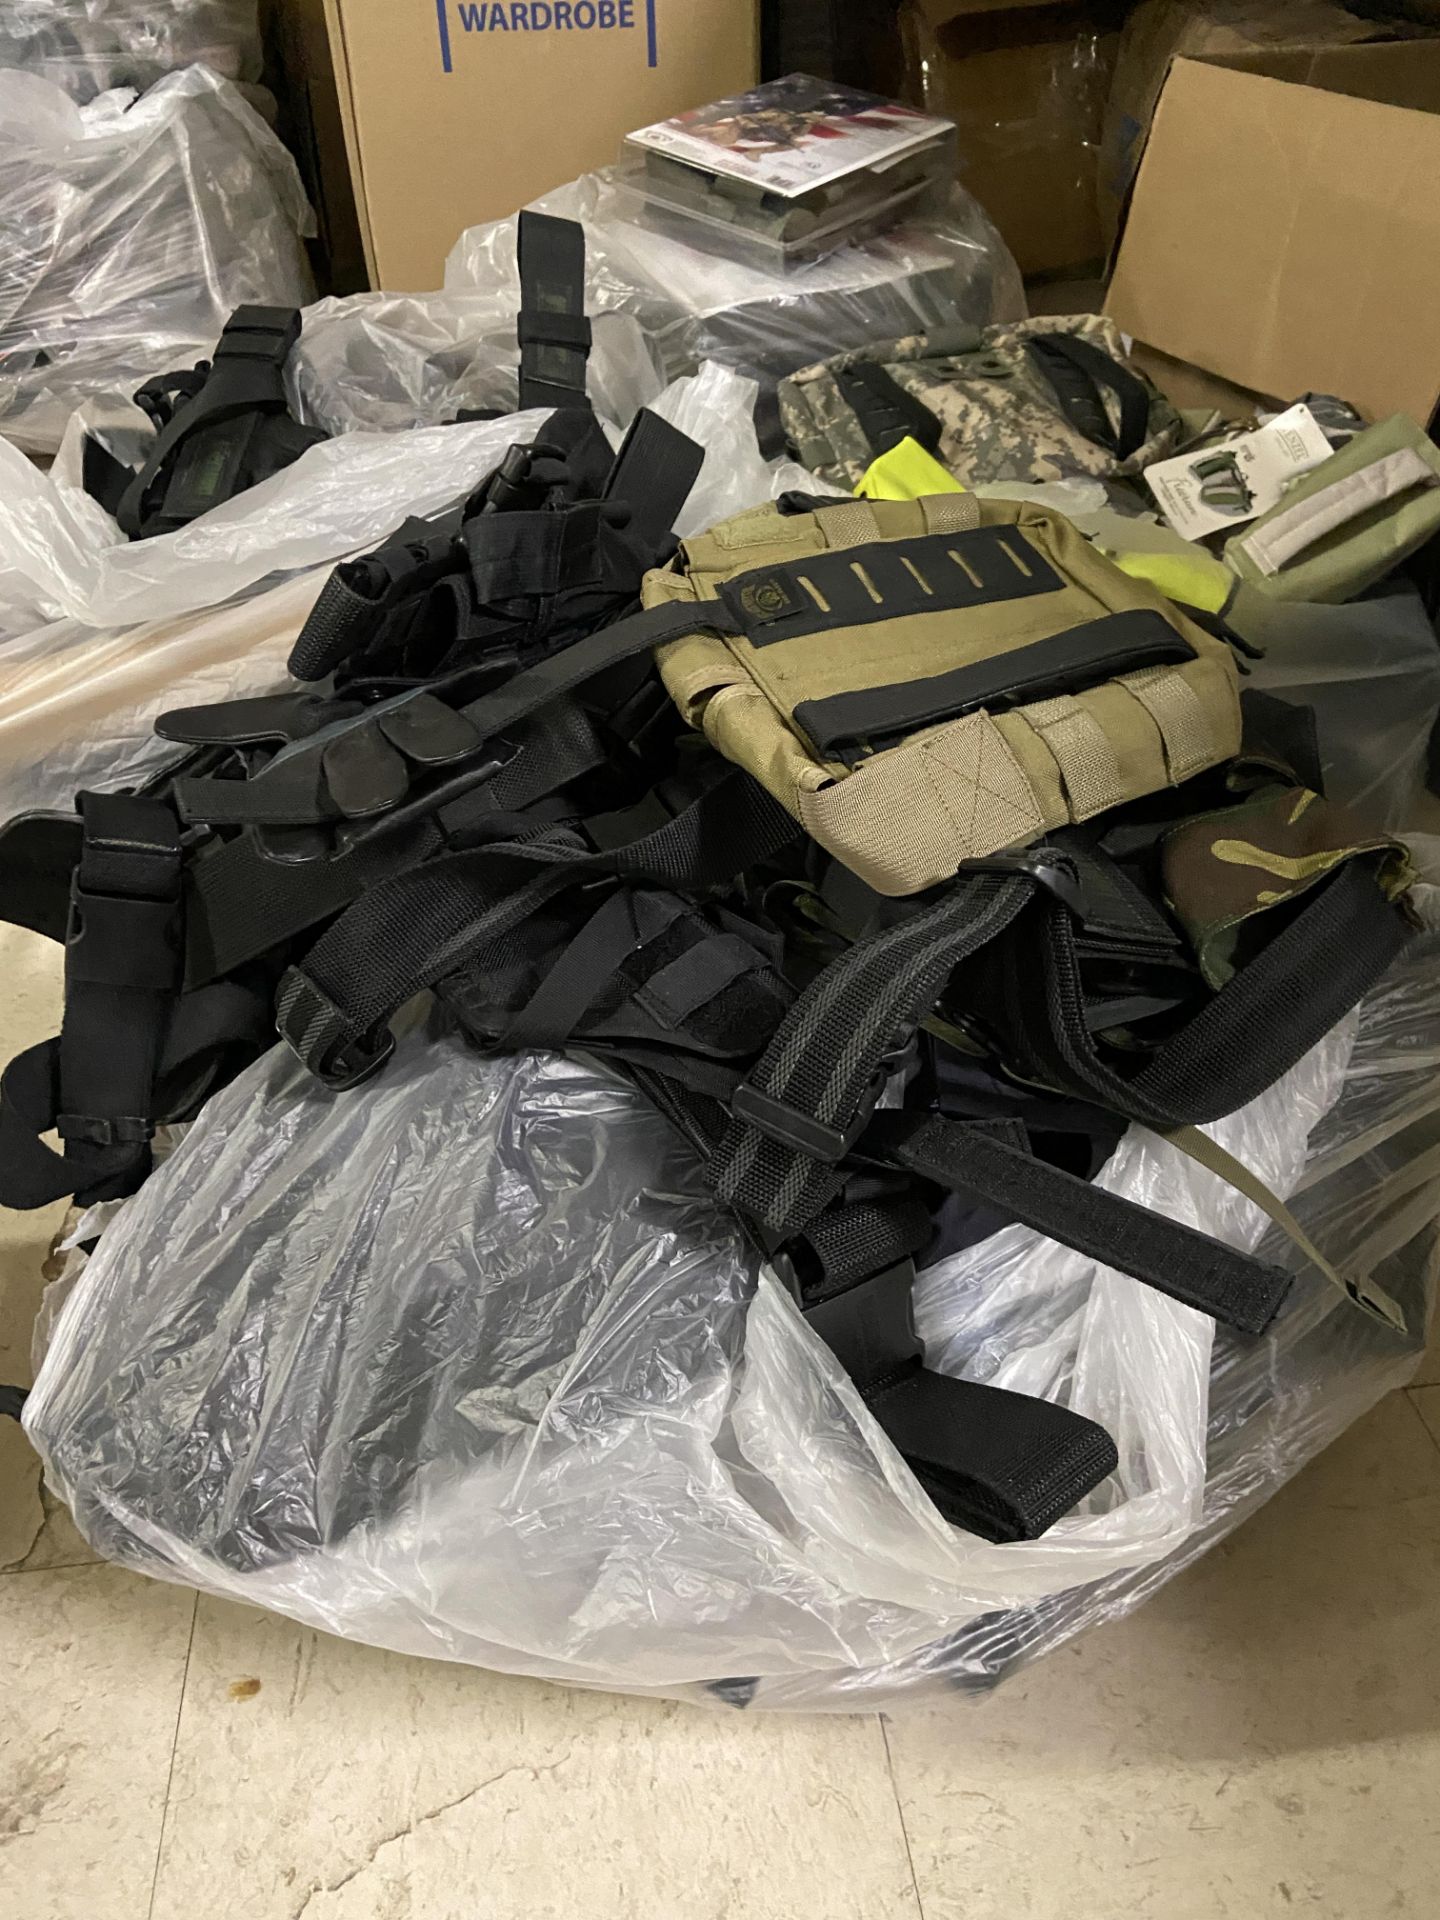 Blackwater Tactical Gear, and Misc other Items, Approx 100+, Misc Vest Gear, Utility Pouches, Etc - Image 2 of 6